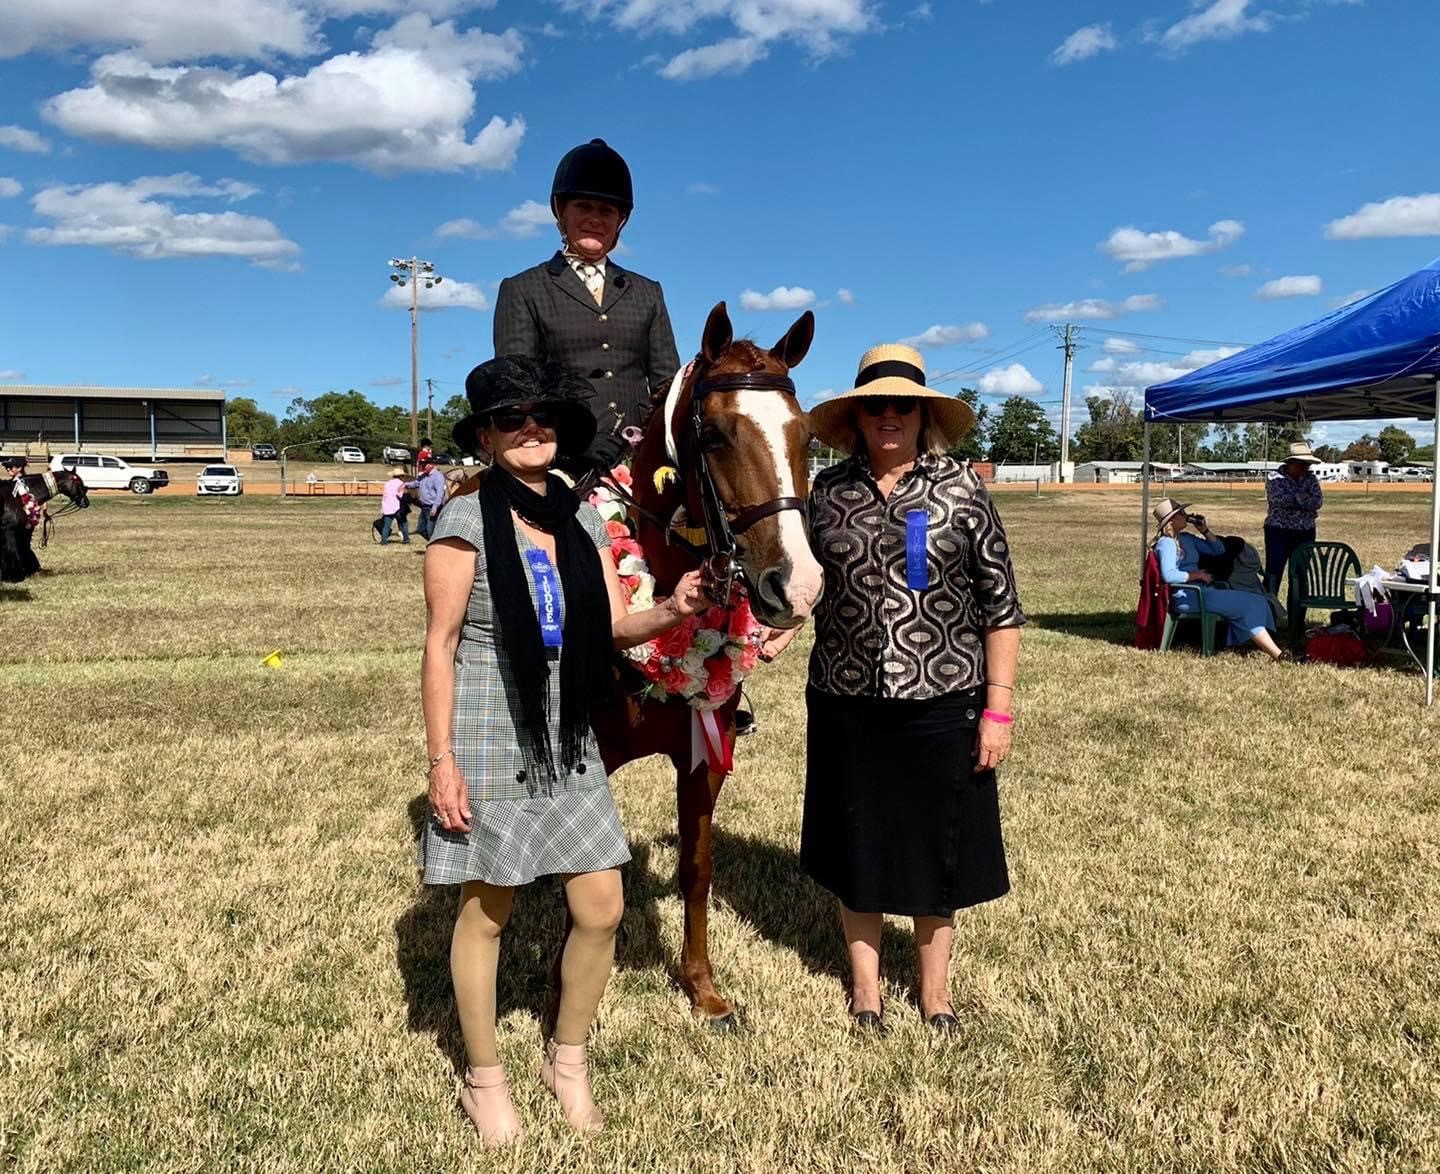 Supreme show hunter was awarded to Karen Nicholl on Mundah Little Romany. She is with judges Catherine Mills and Sue Foreman.